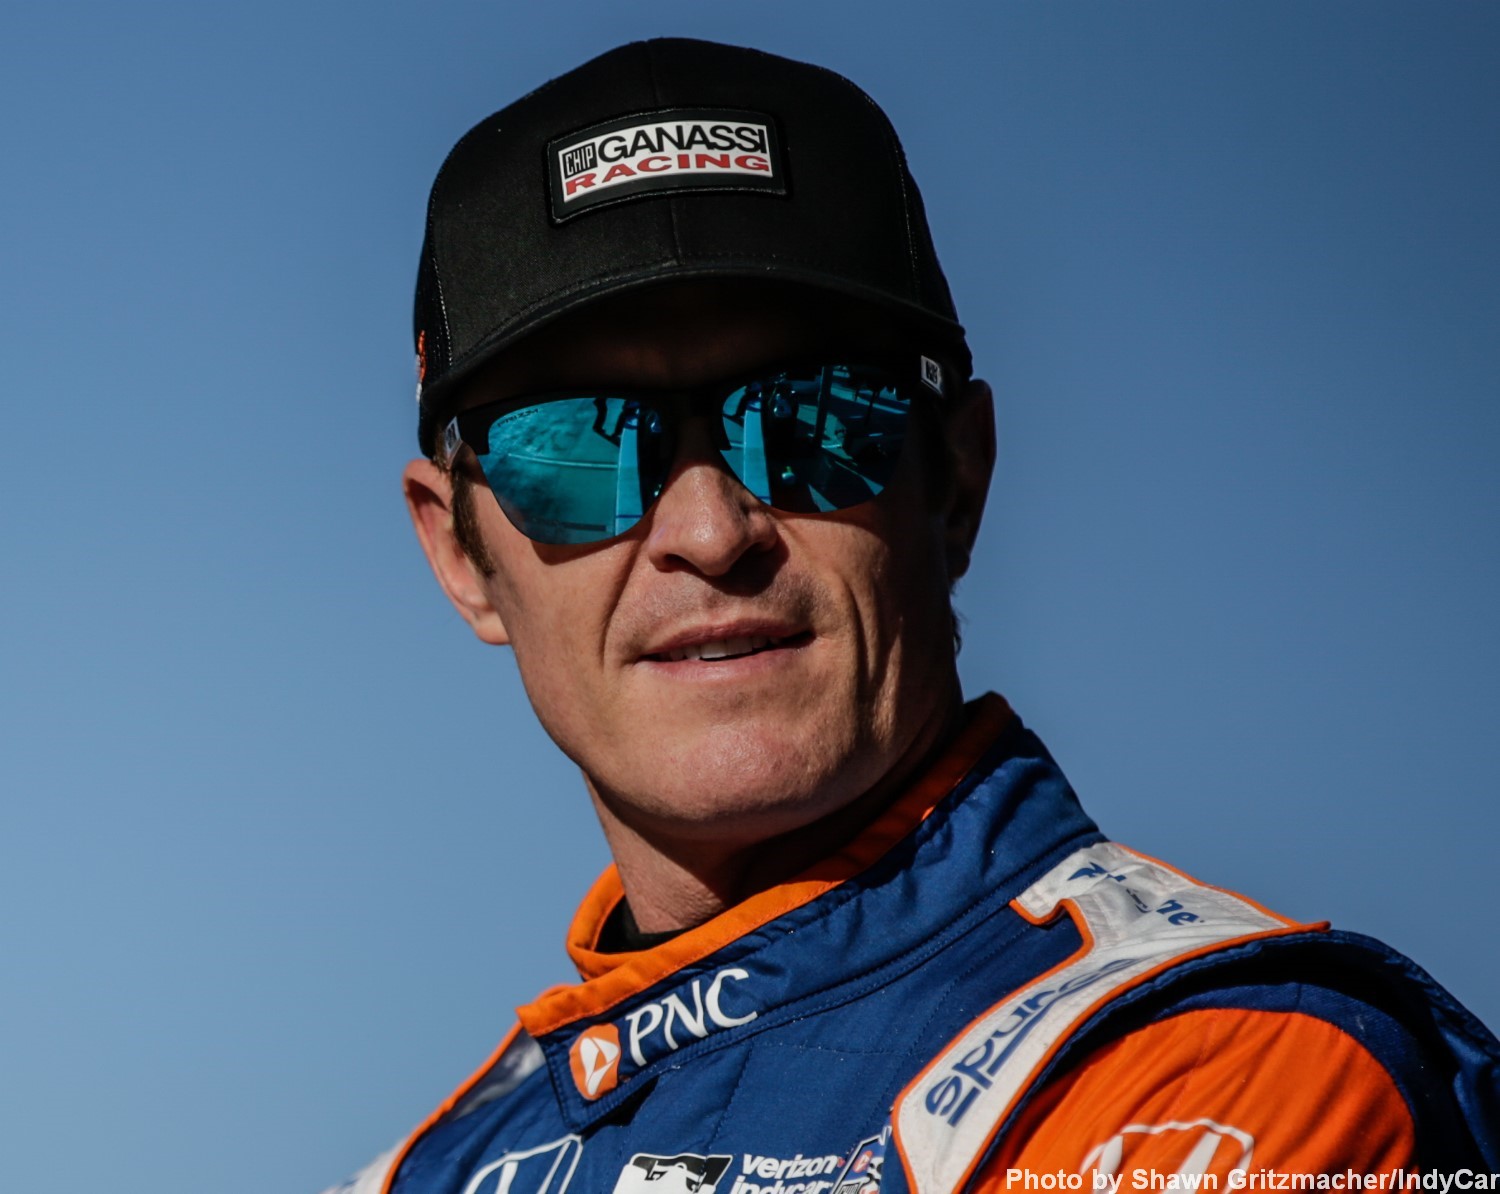 Scott Dixon knows 50 million people watch every F1 race around the world, compared to 0.5 million for IndyCar